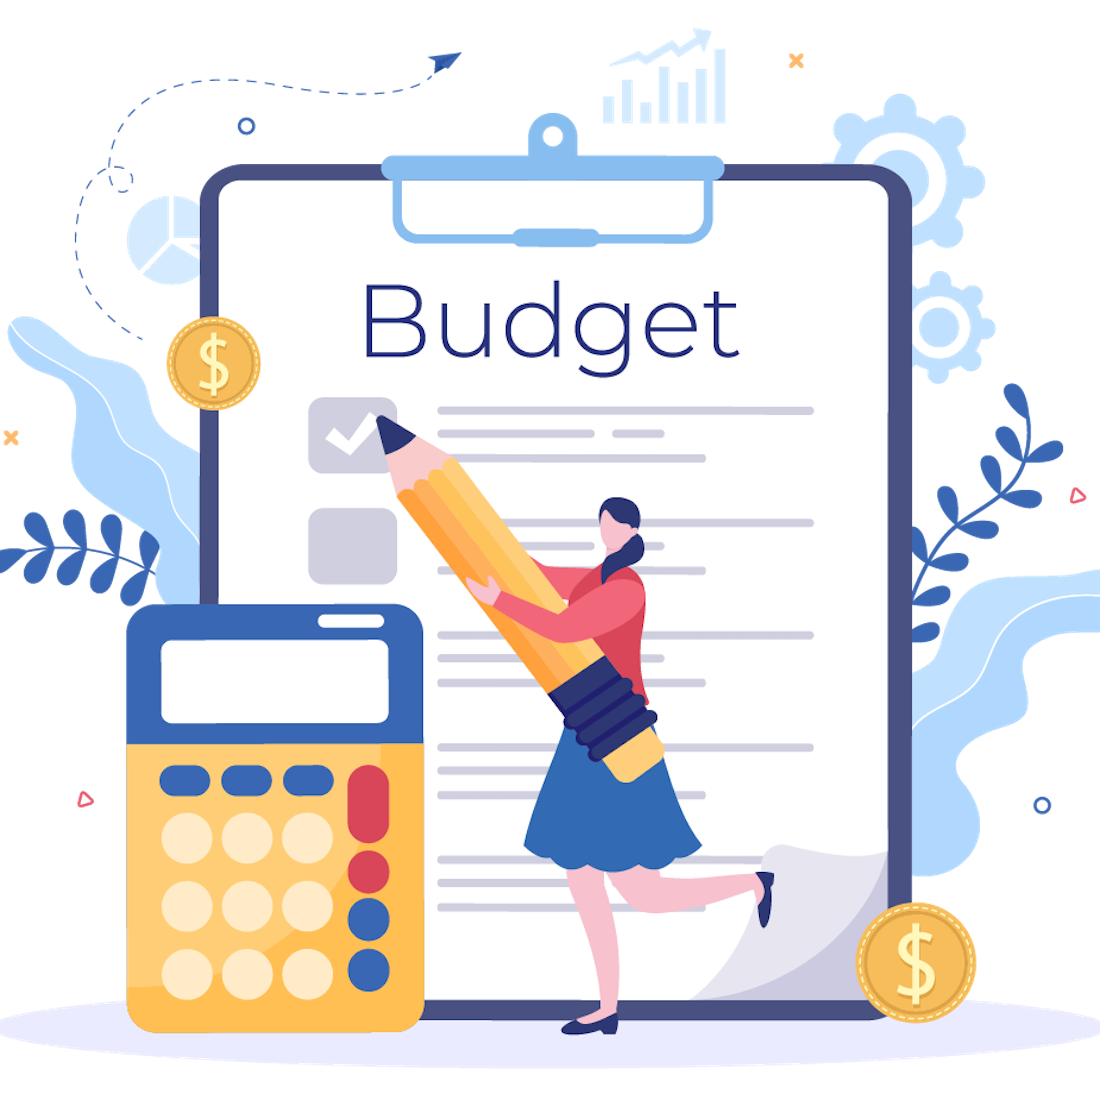 20 Budget Financial to Managing or Planning Illustrations preview image.